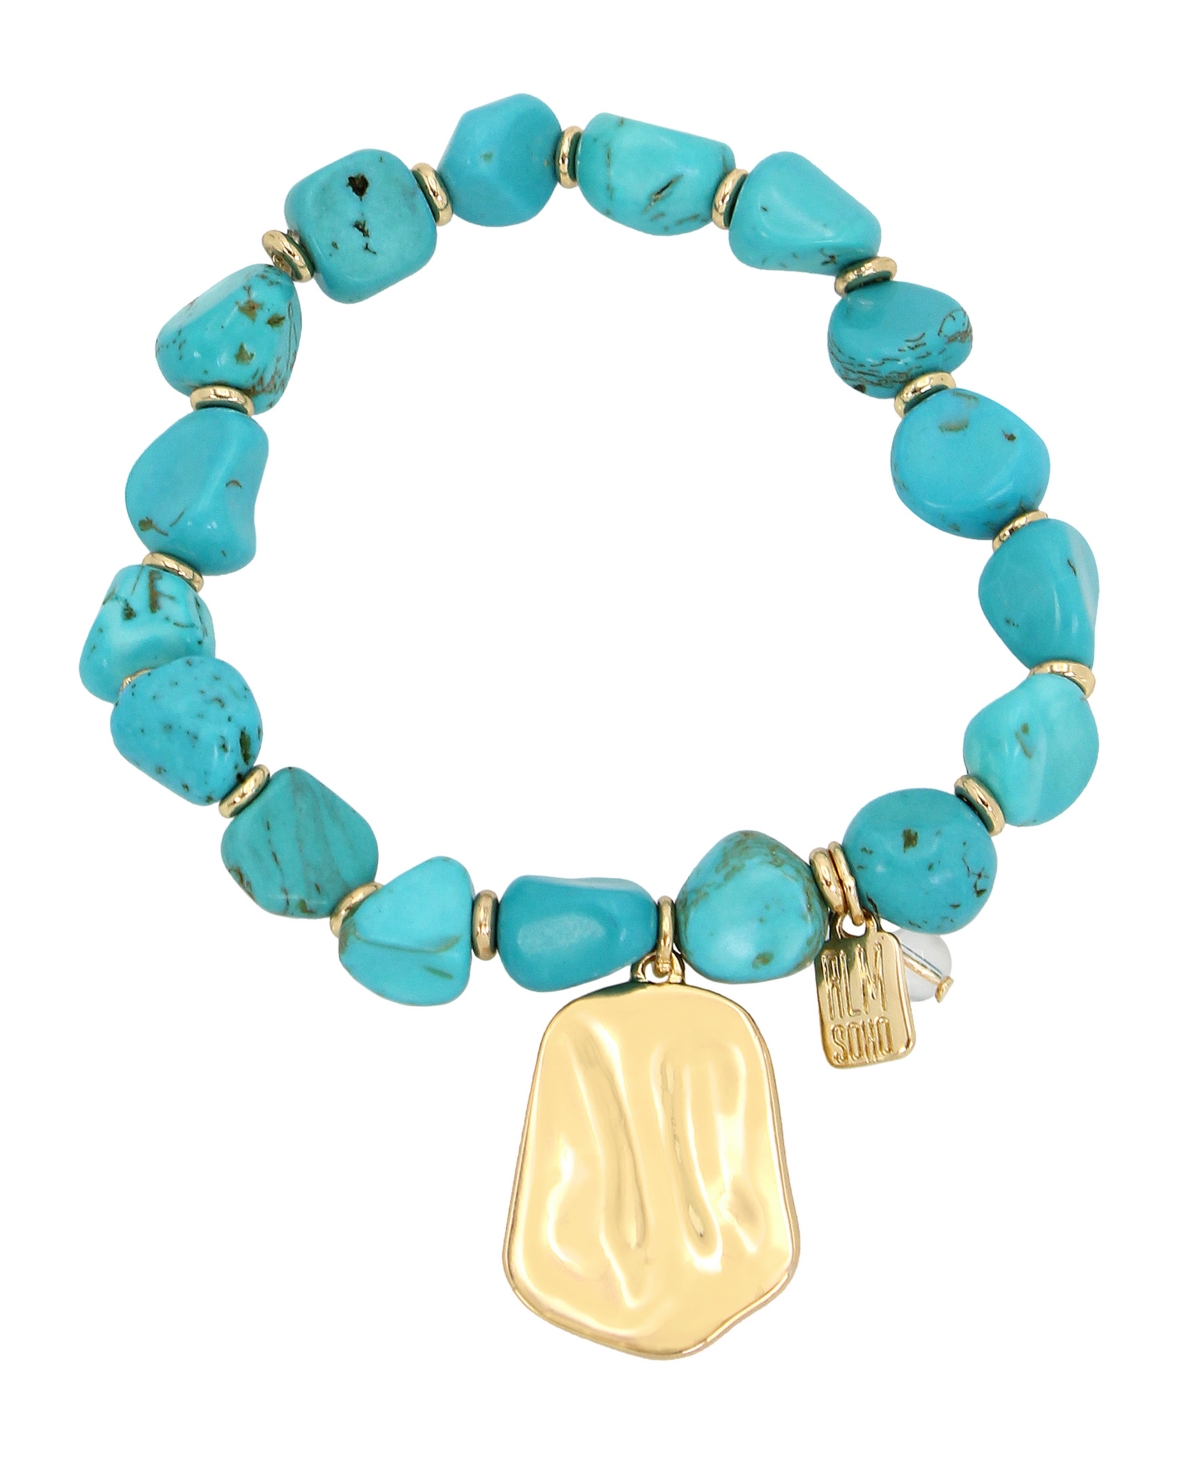 Turquoise Beaded Textured Charm Stretch Bracelet - Turquoise